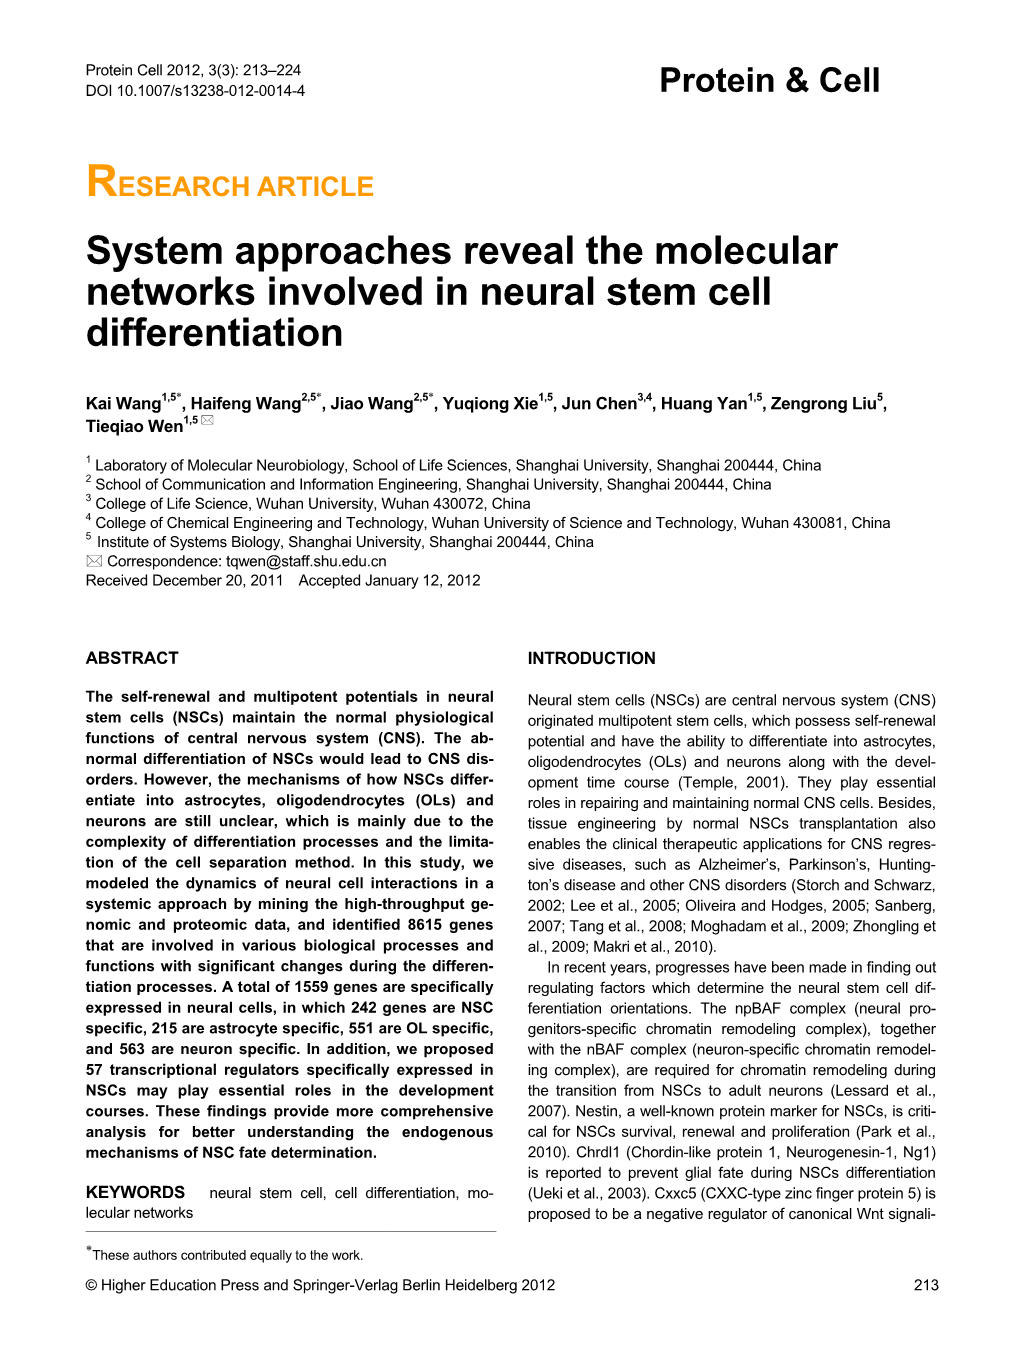 System Approaches Reveal the Molecular Networks Involved in Neural Stem Cell Differentiation